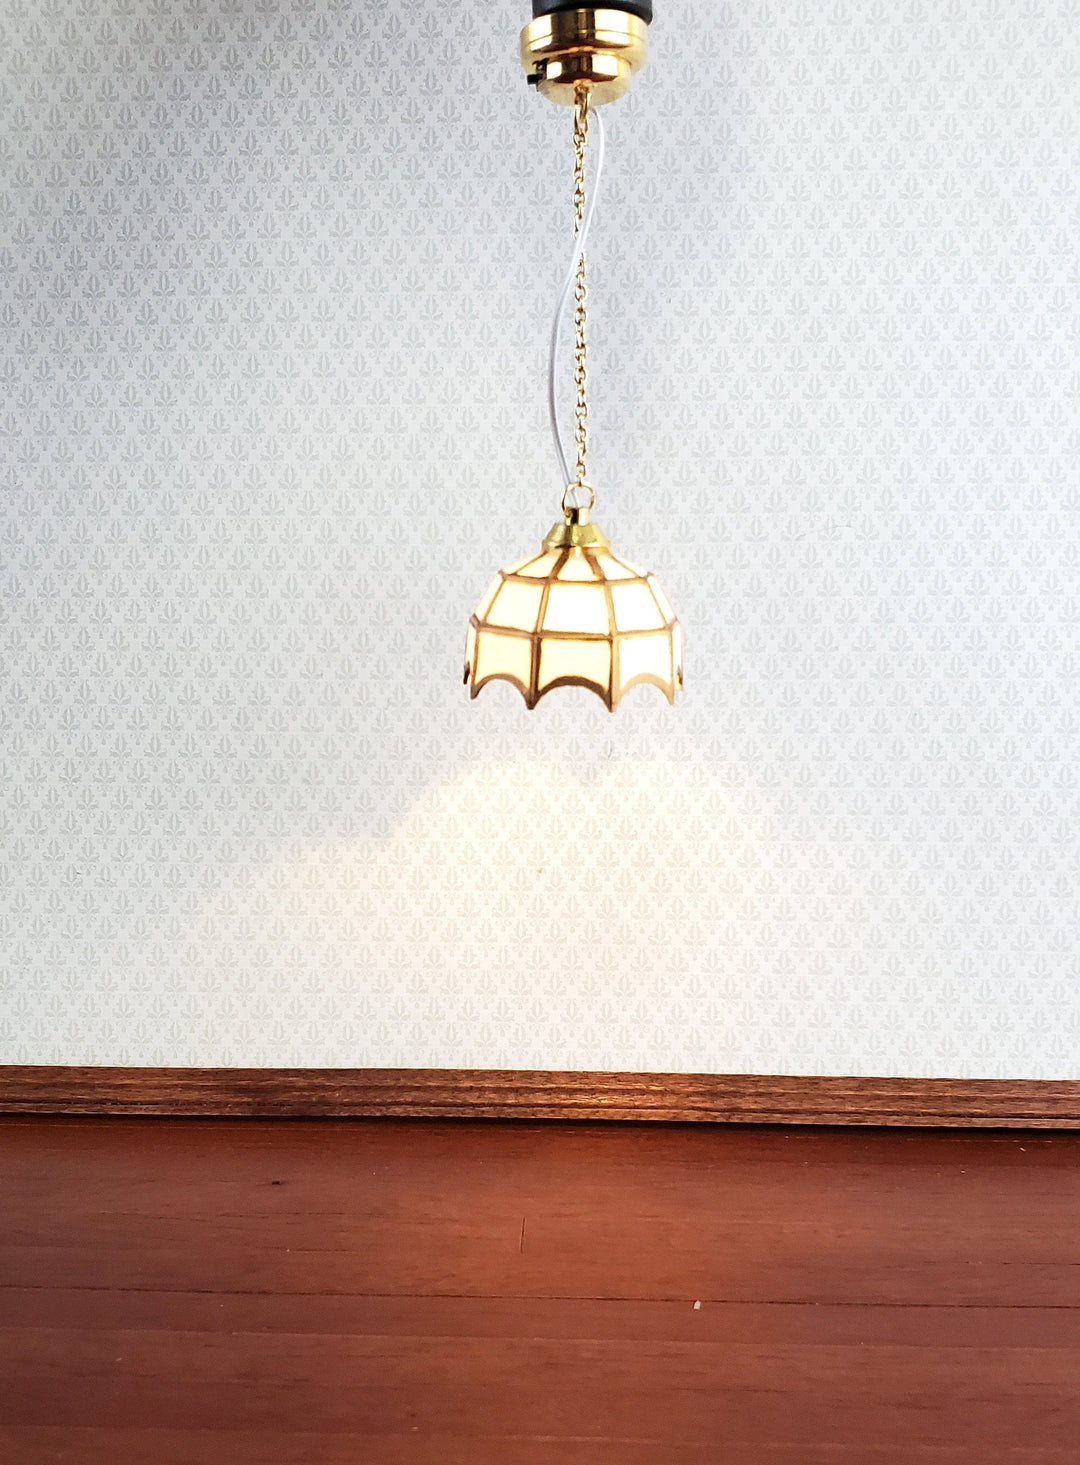 Dollhouse Miniature Battery Light Hanging Ceiling White Gold 1:12 Scale